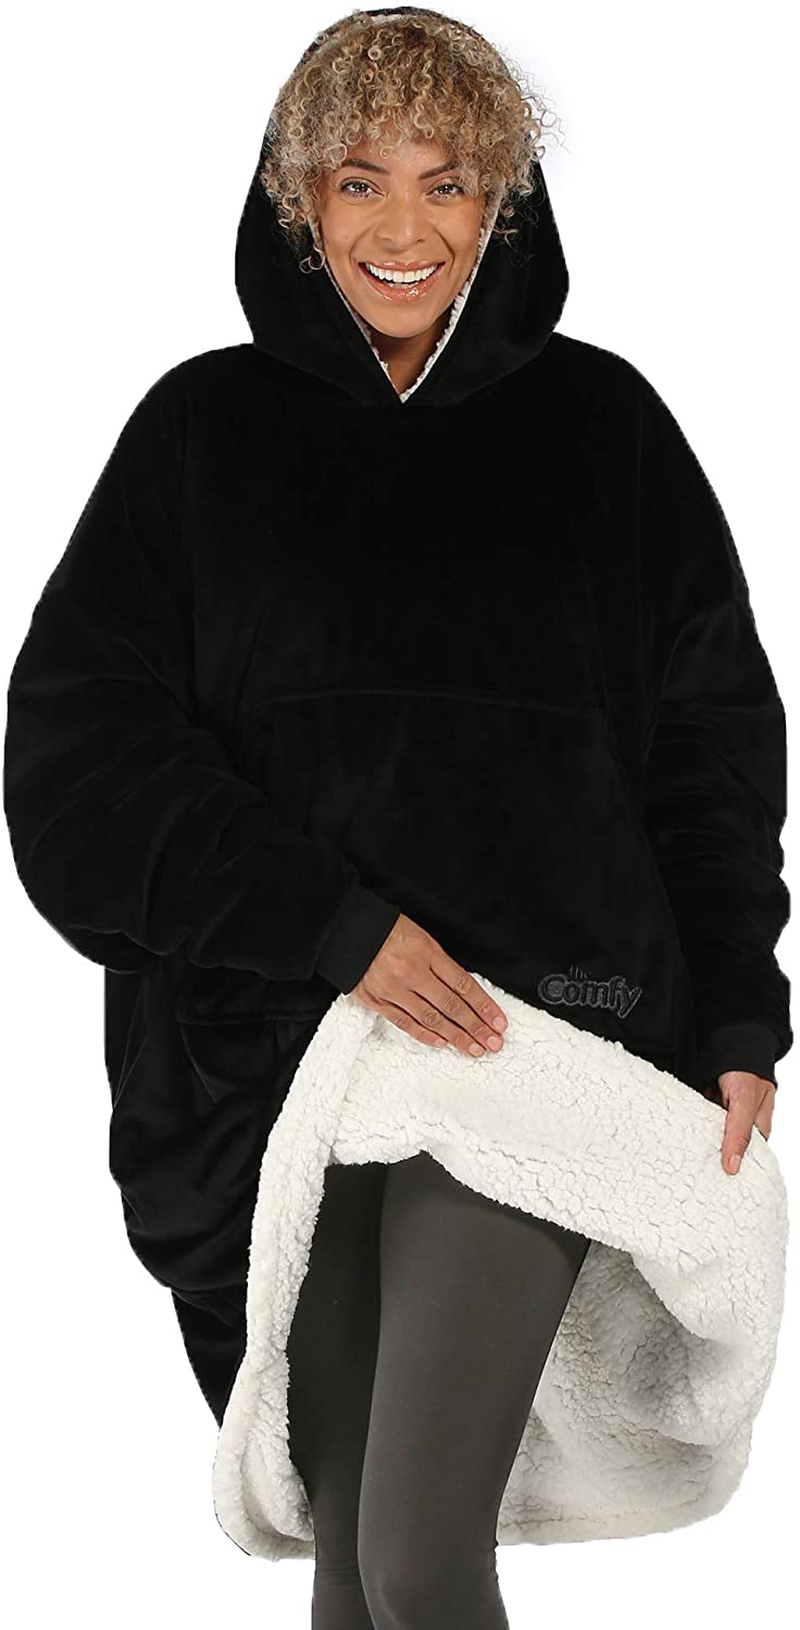 THE COMFY Original | Oversized Microfiber & Sherpa Wearable Blanket, Seen on Shark Tank, One Size Fits All Burgundy Home & Garden > Decor > Seasonal & Holiday Decorations The Comfy Black Original 